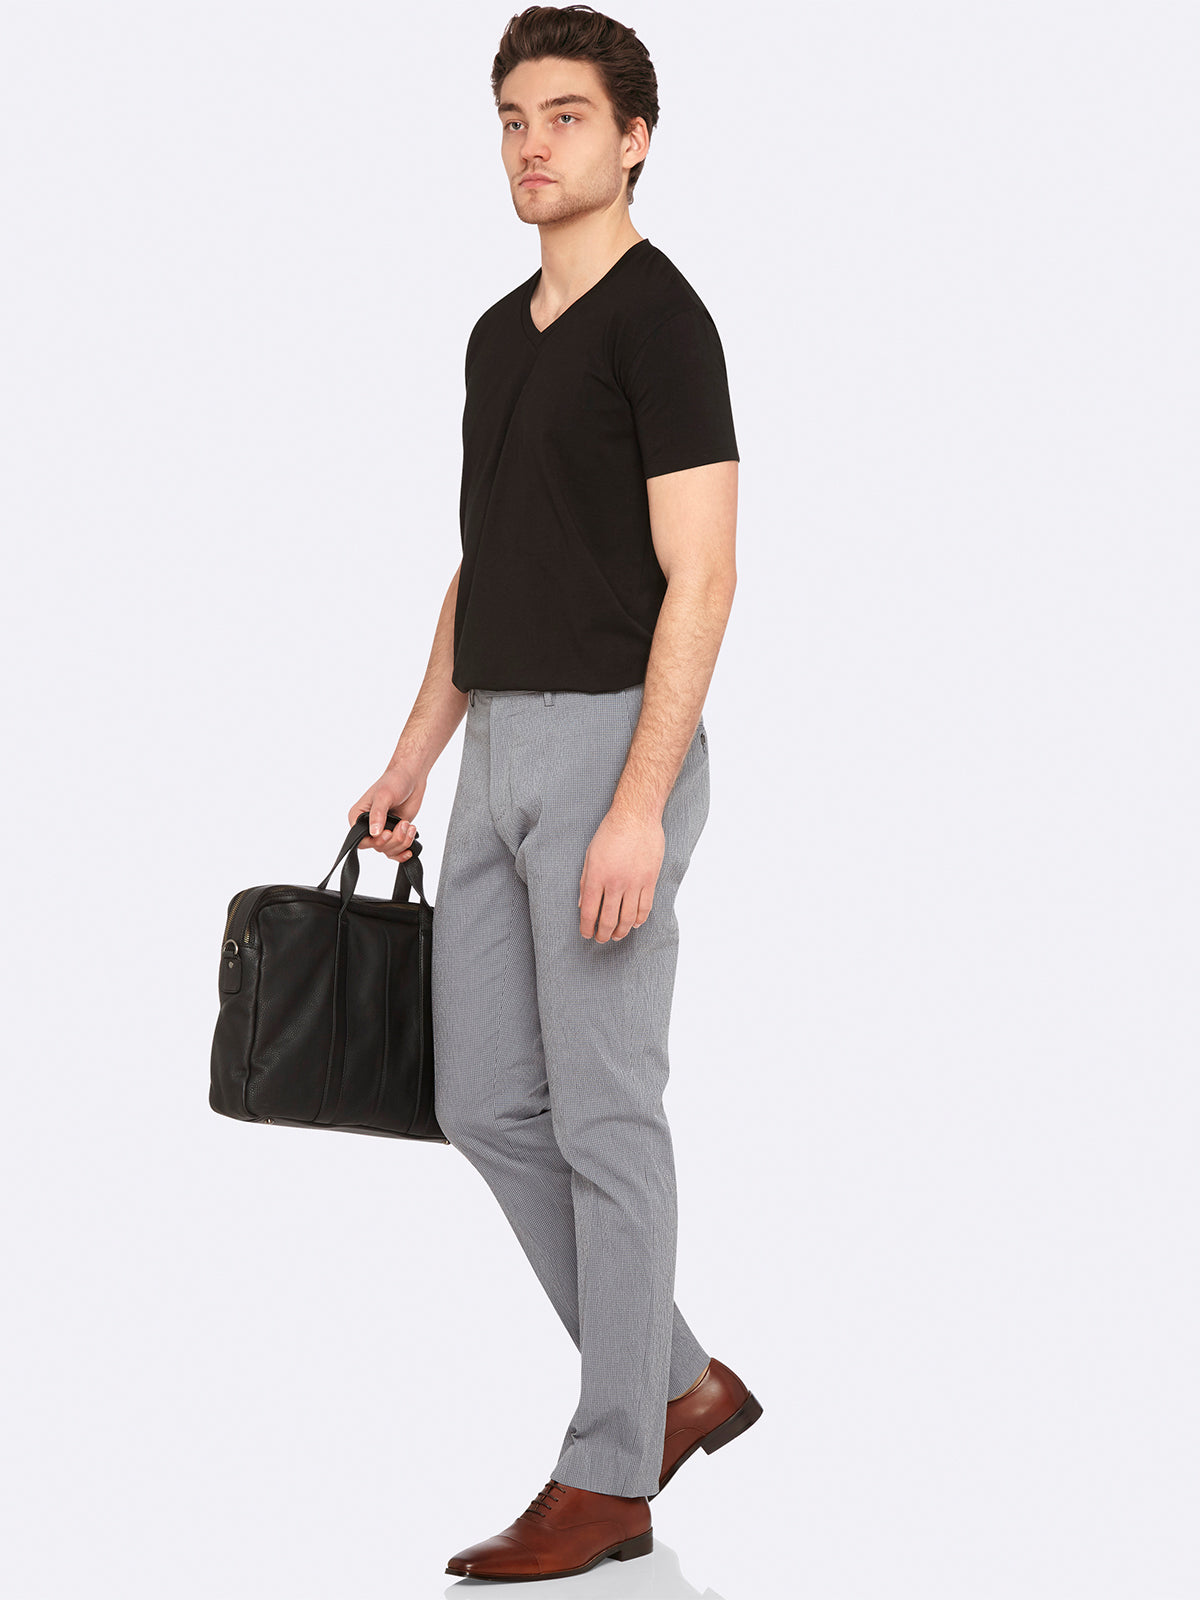 STRETCH TAILORED TROUSERS MENS TROUSERS